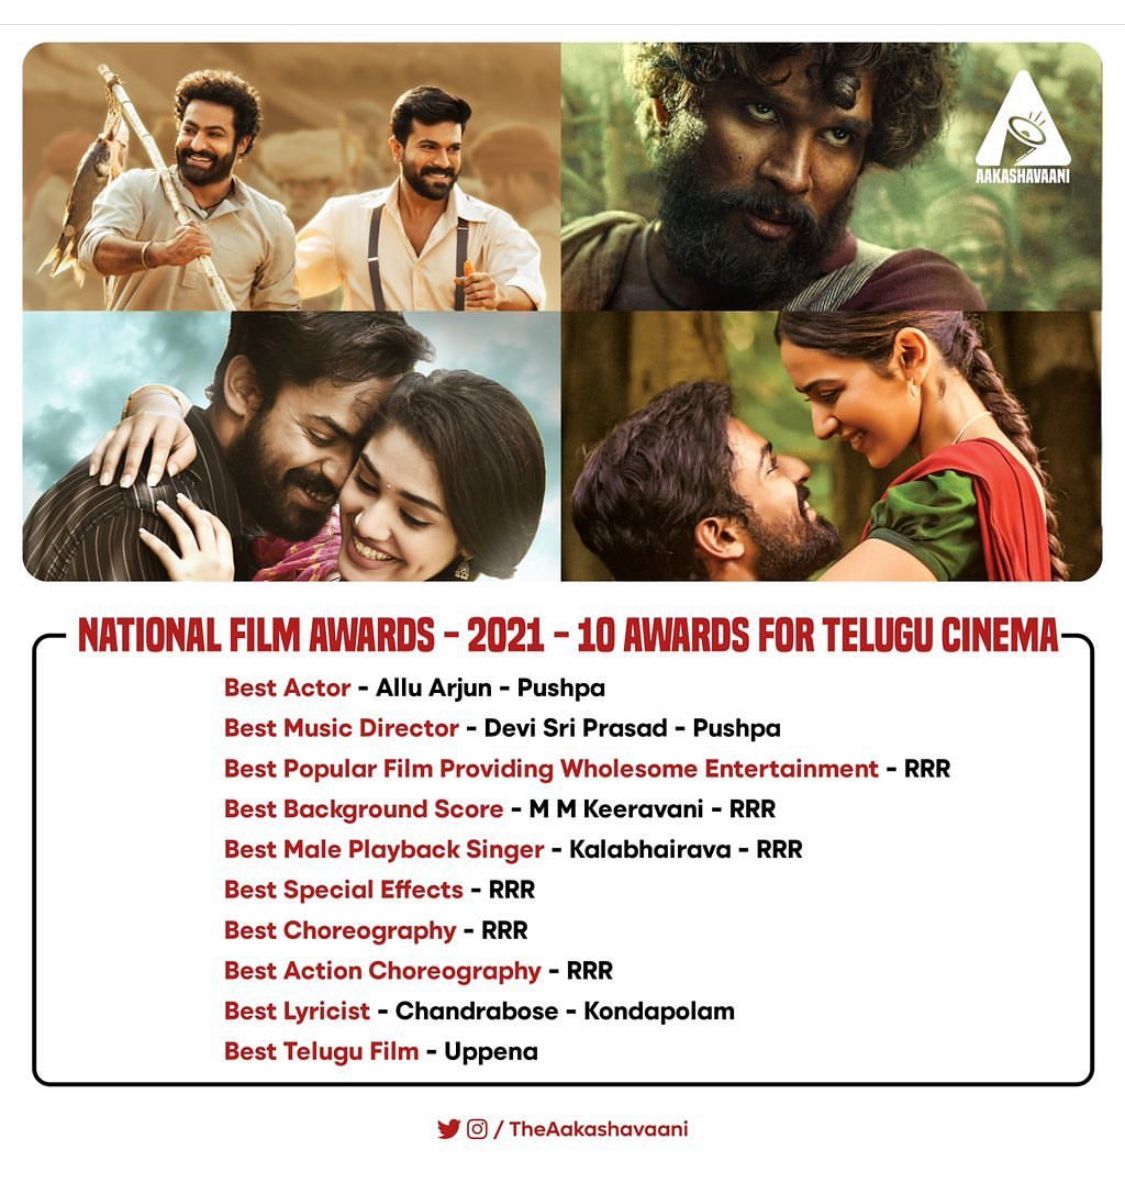 Congratulations to the winners of the 69th National Film Awards! #NationalAwards